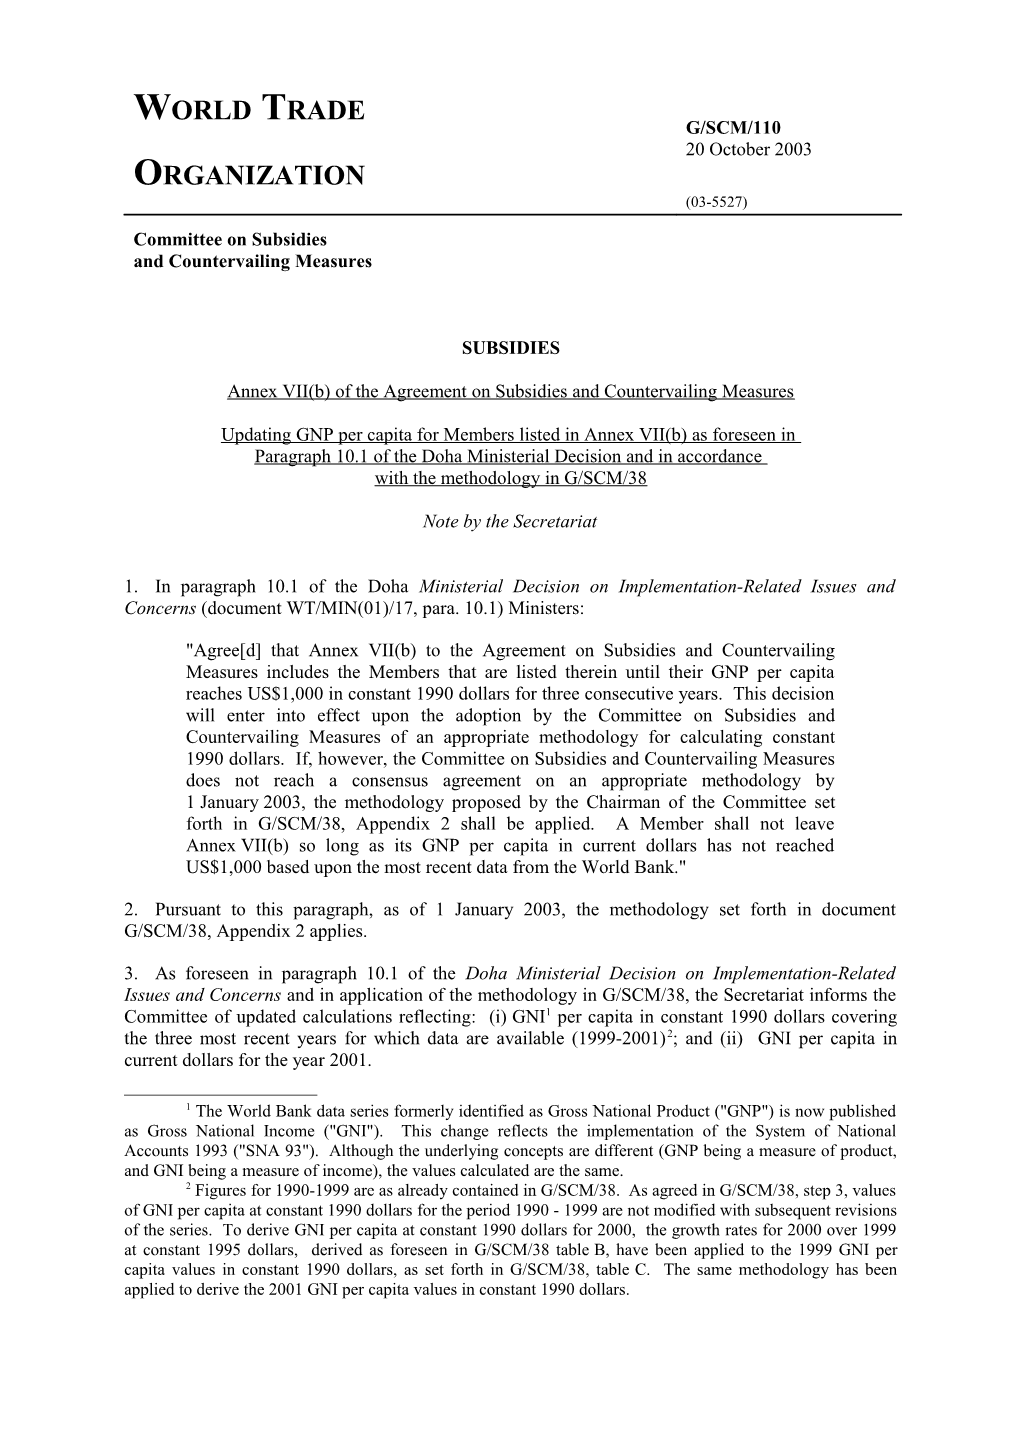 Annex VII(B) of the Agreement on Subsidies and Countervailing Measures